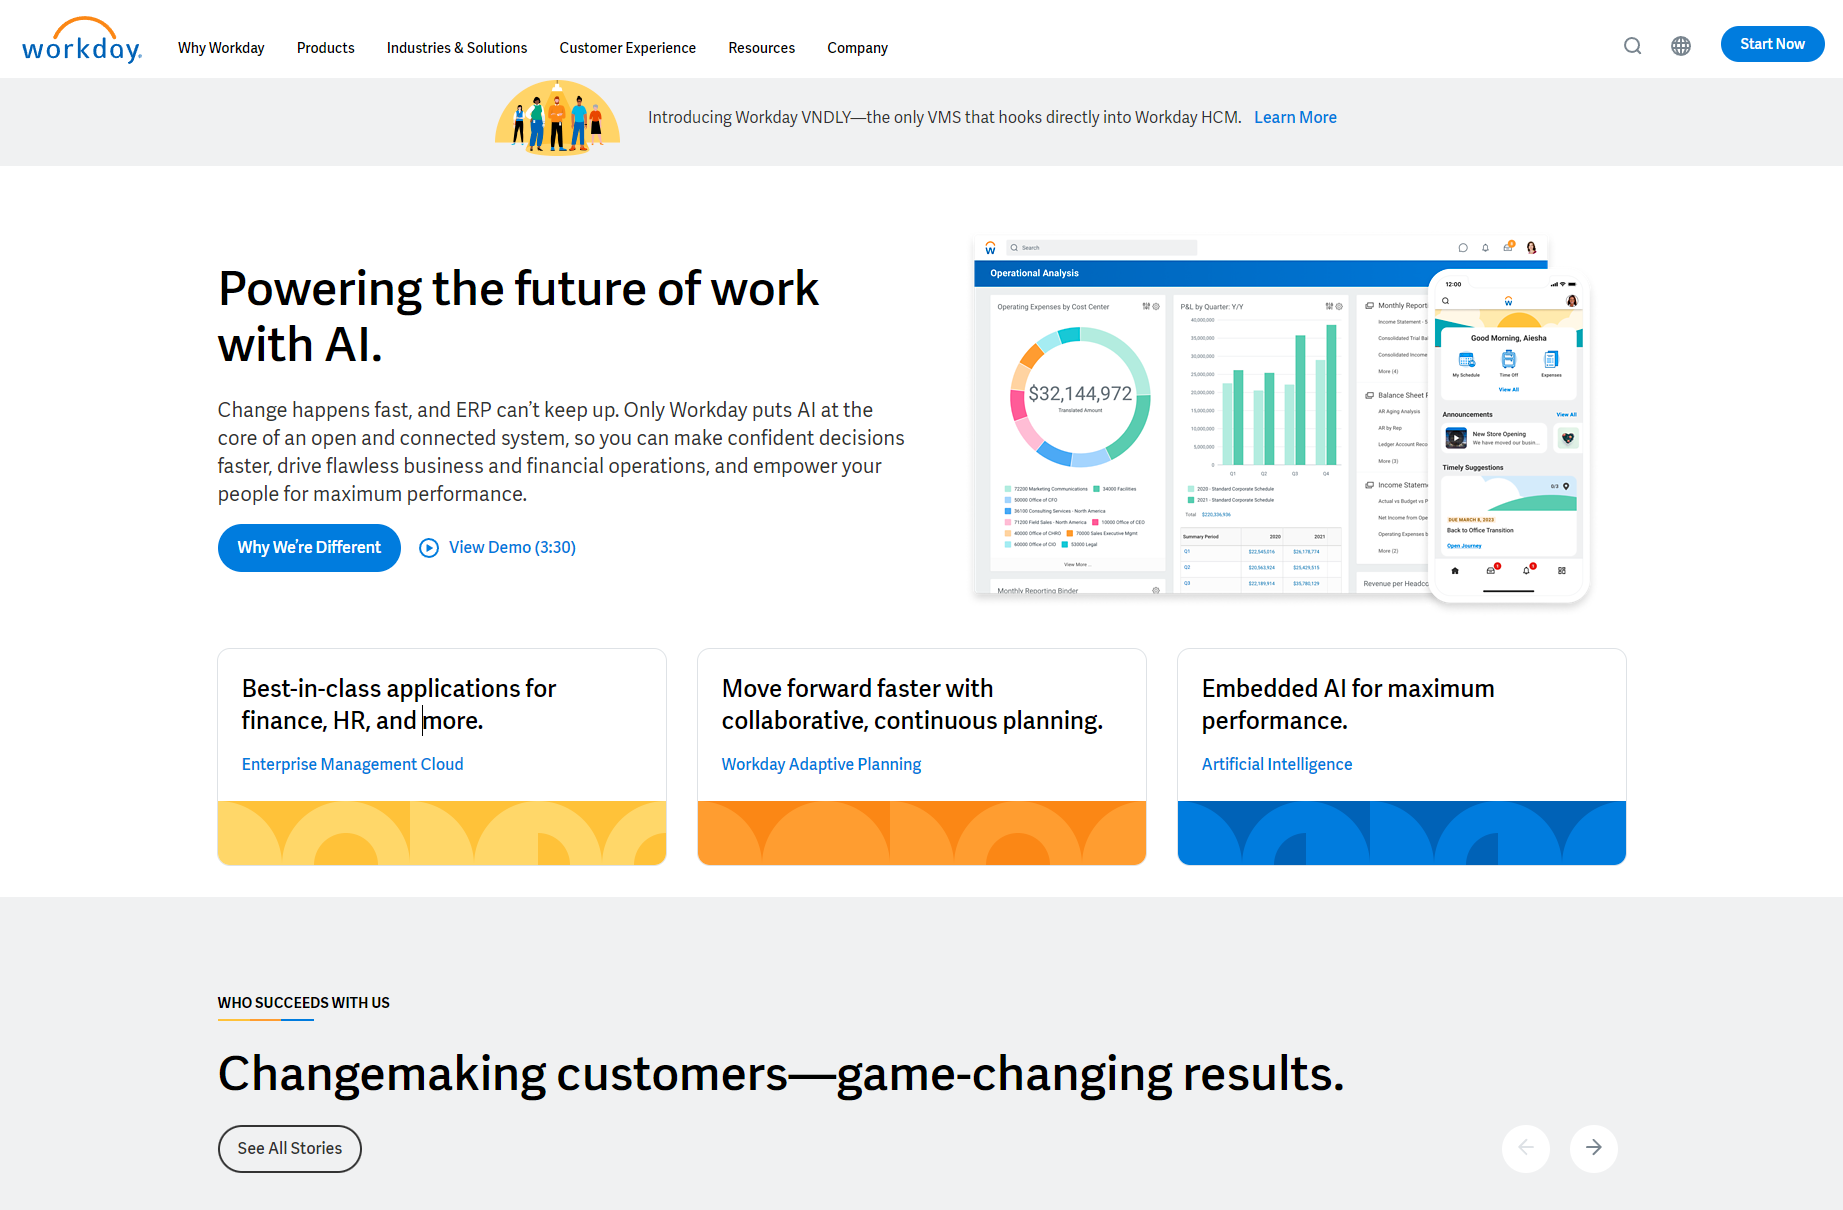 Image alt: Workday is a financial managemen tool that used AI to help with decison making. 